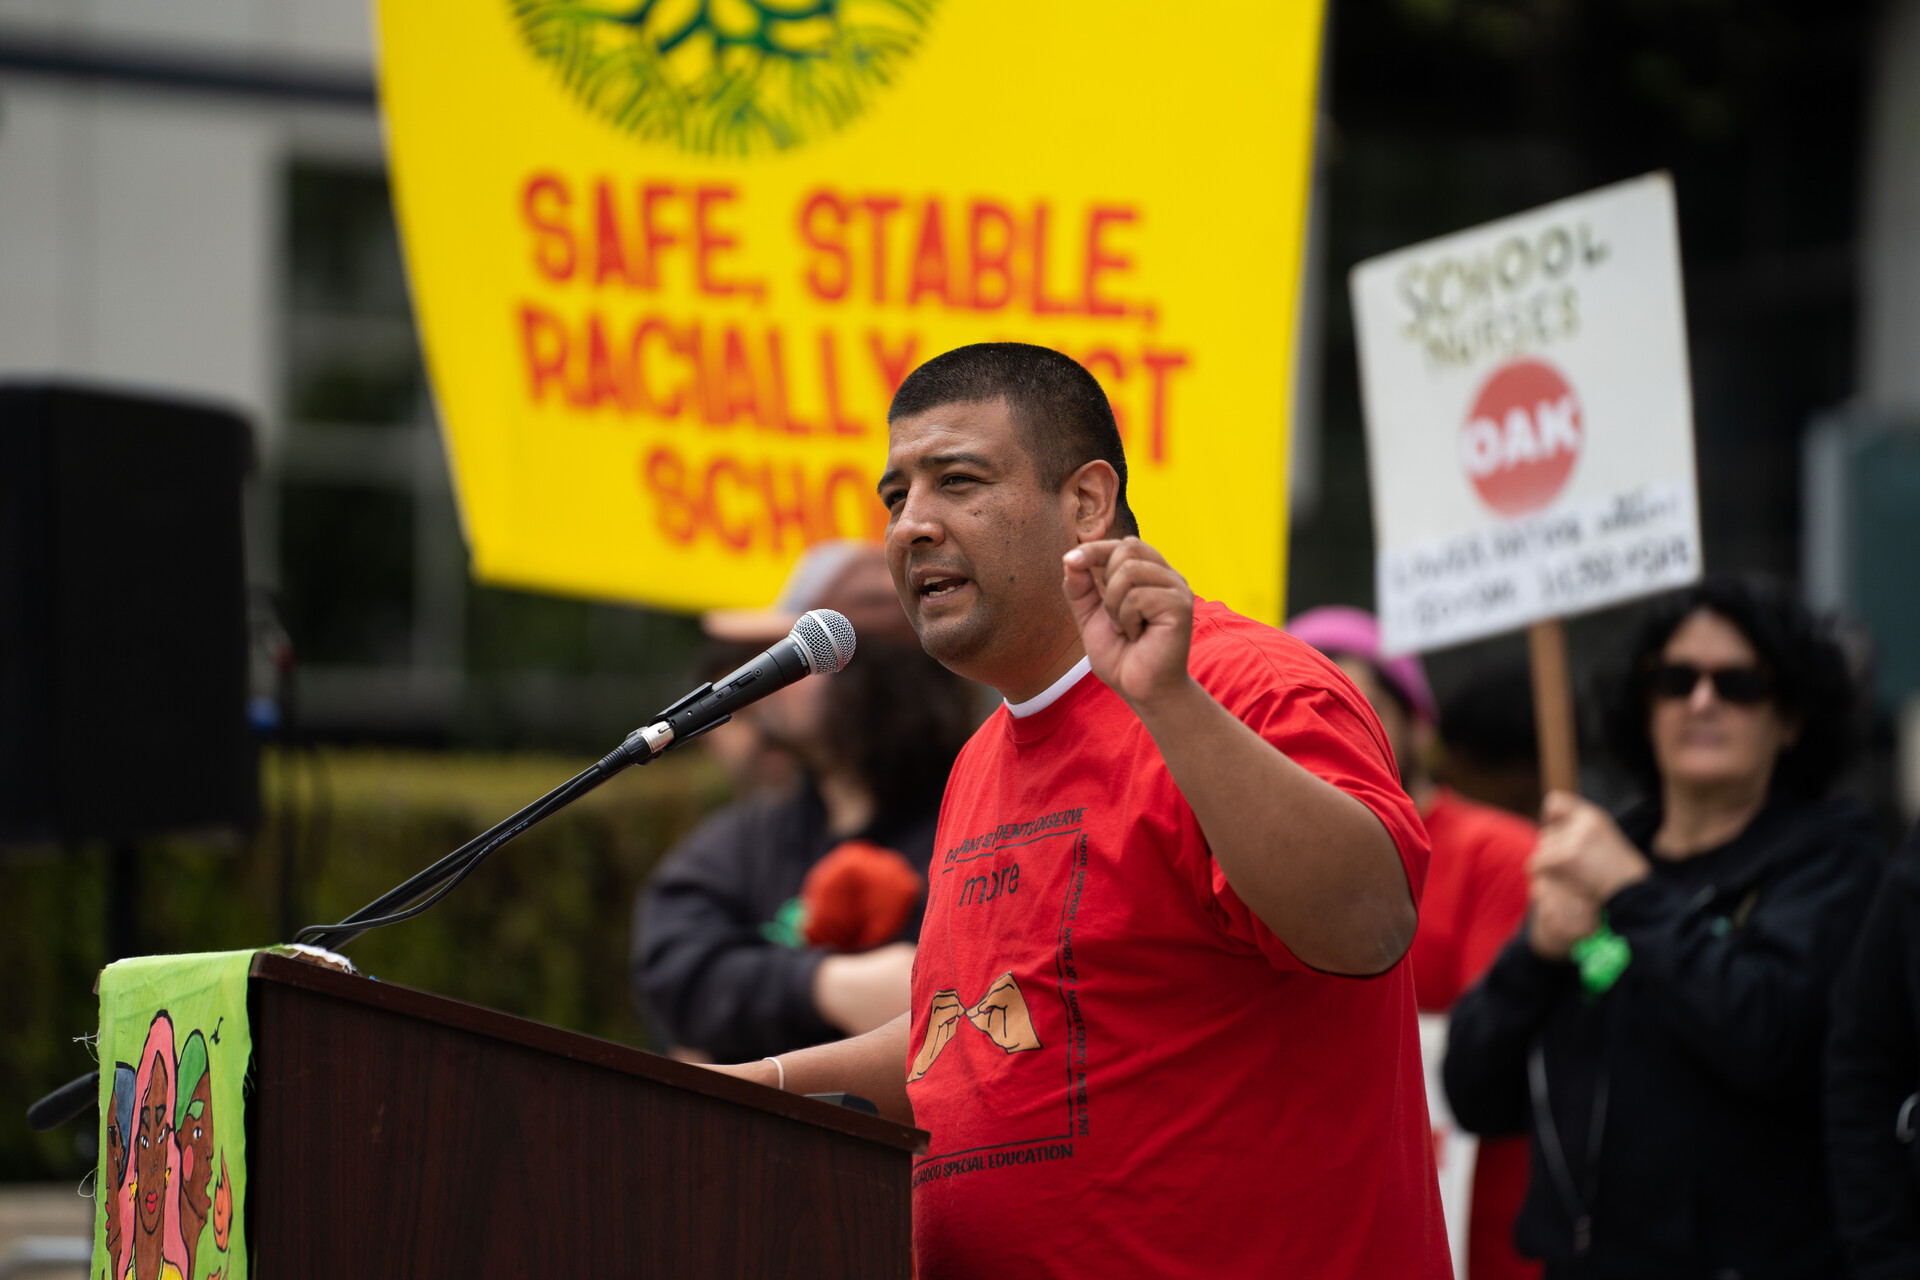 A man in a red T-shirt with dark hair speaks from a podium as large signs behind him read, "Safe, Stable, Racially Just Schools."